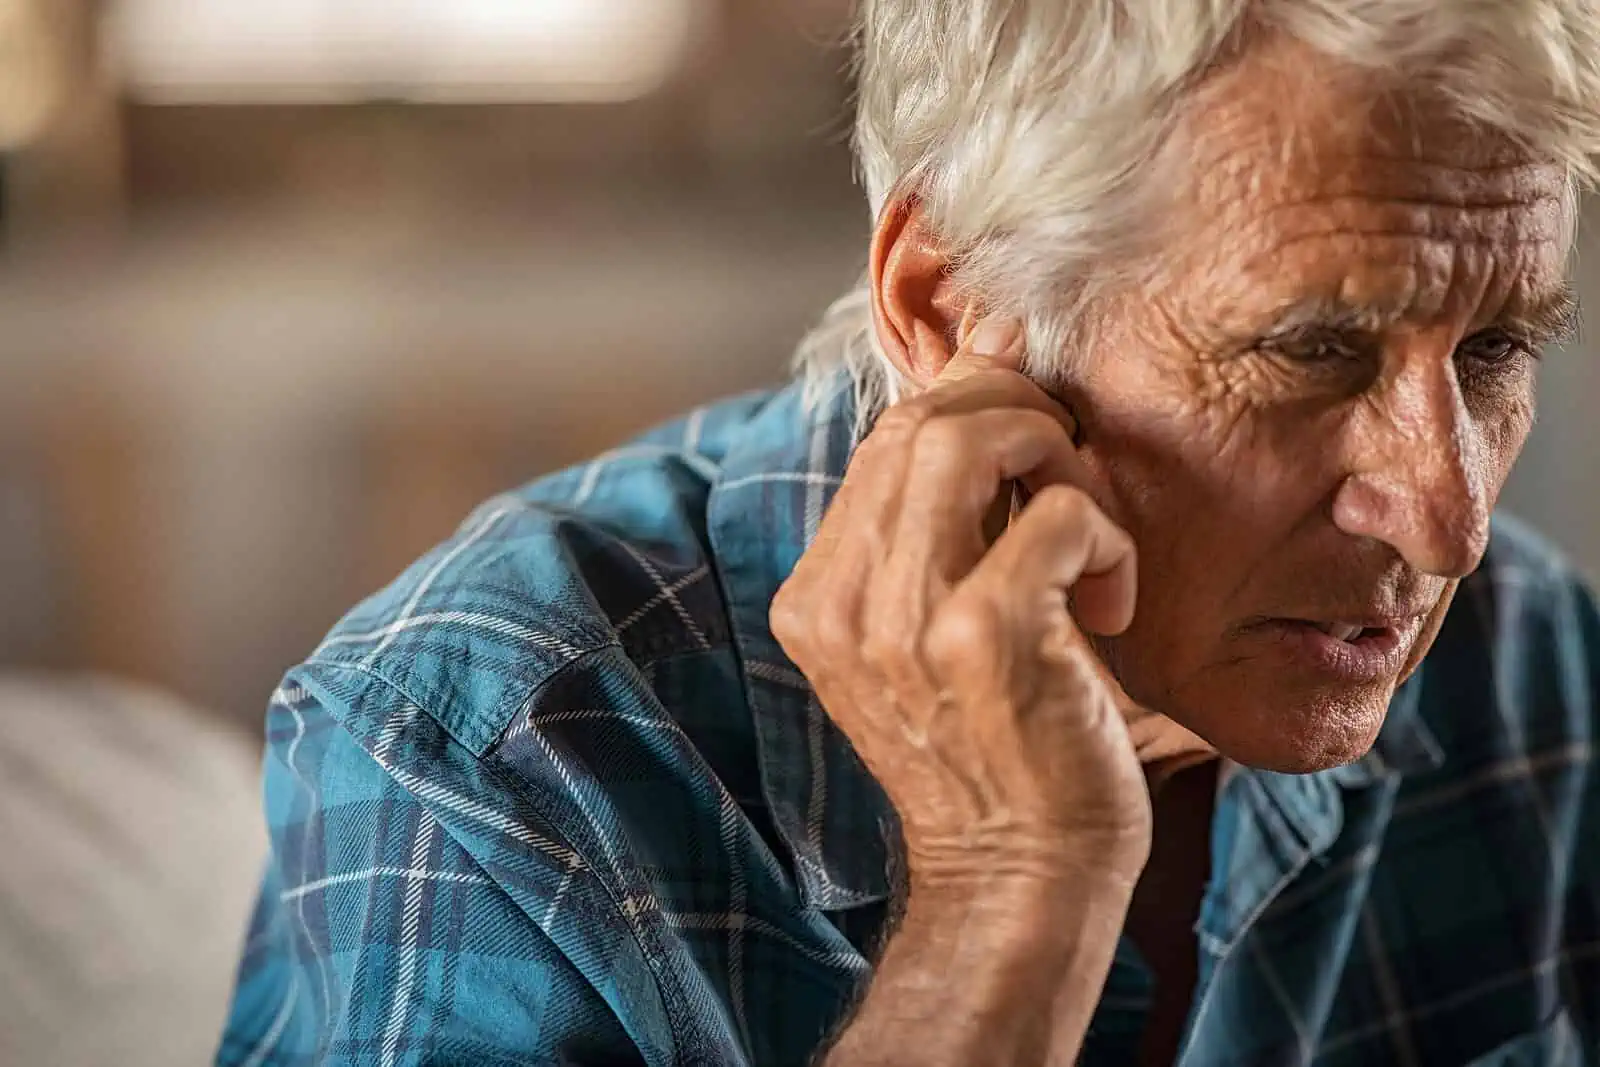 Elderly man in pain as he holds his ear